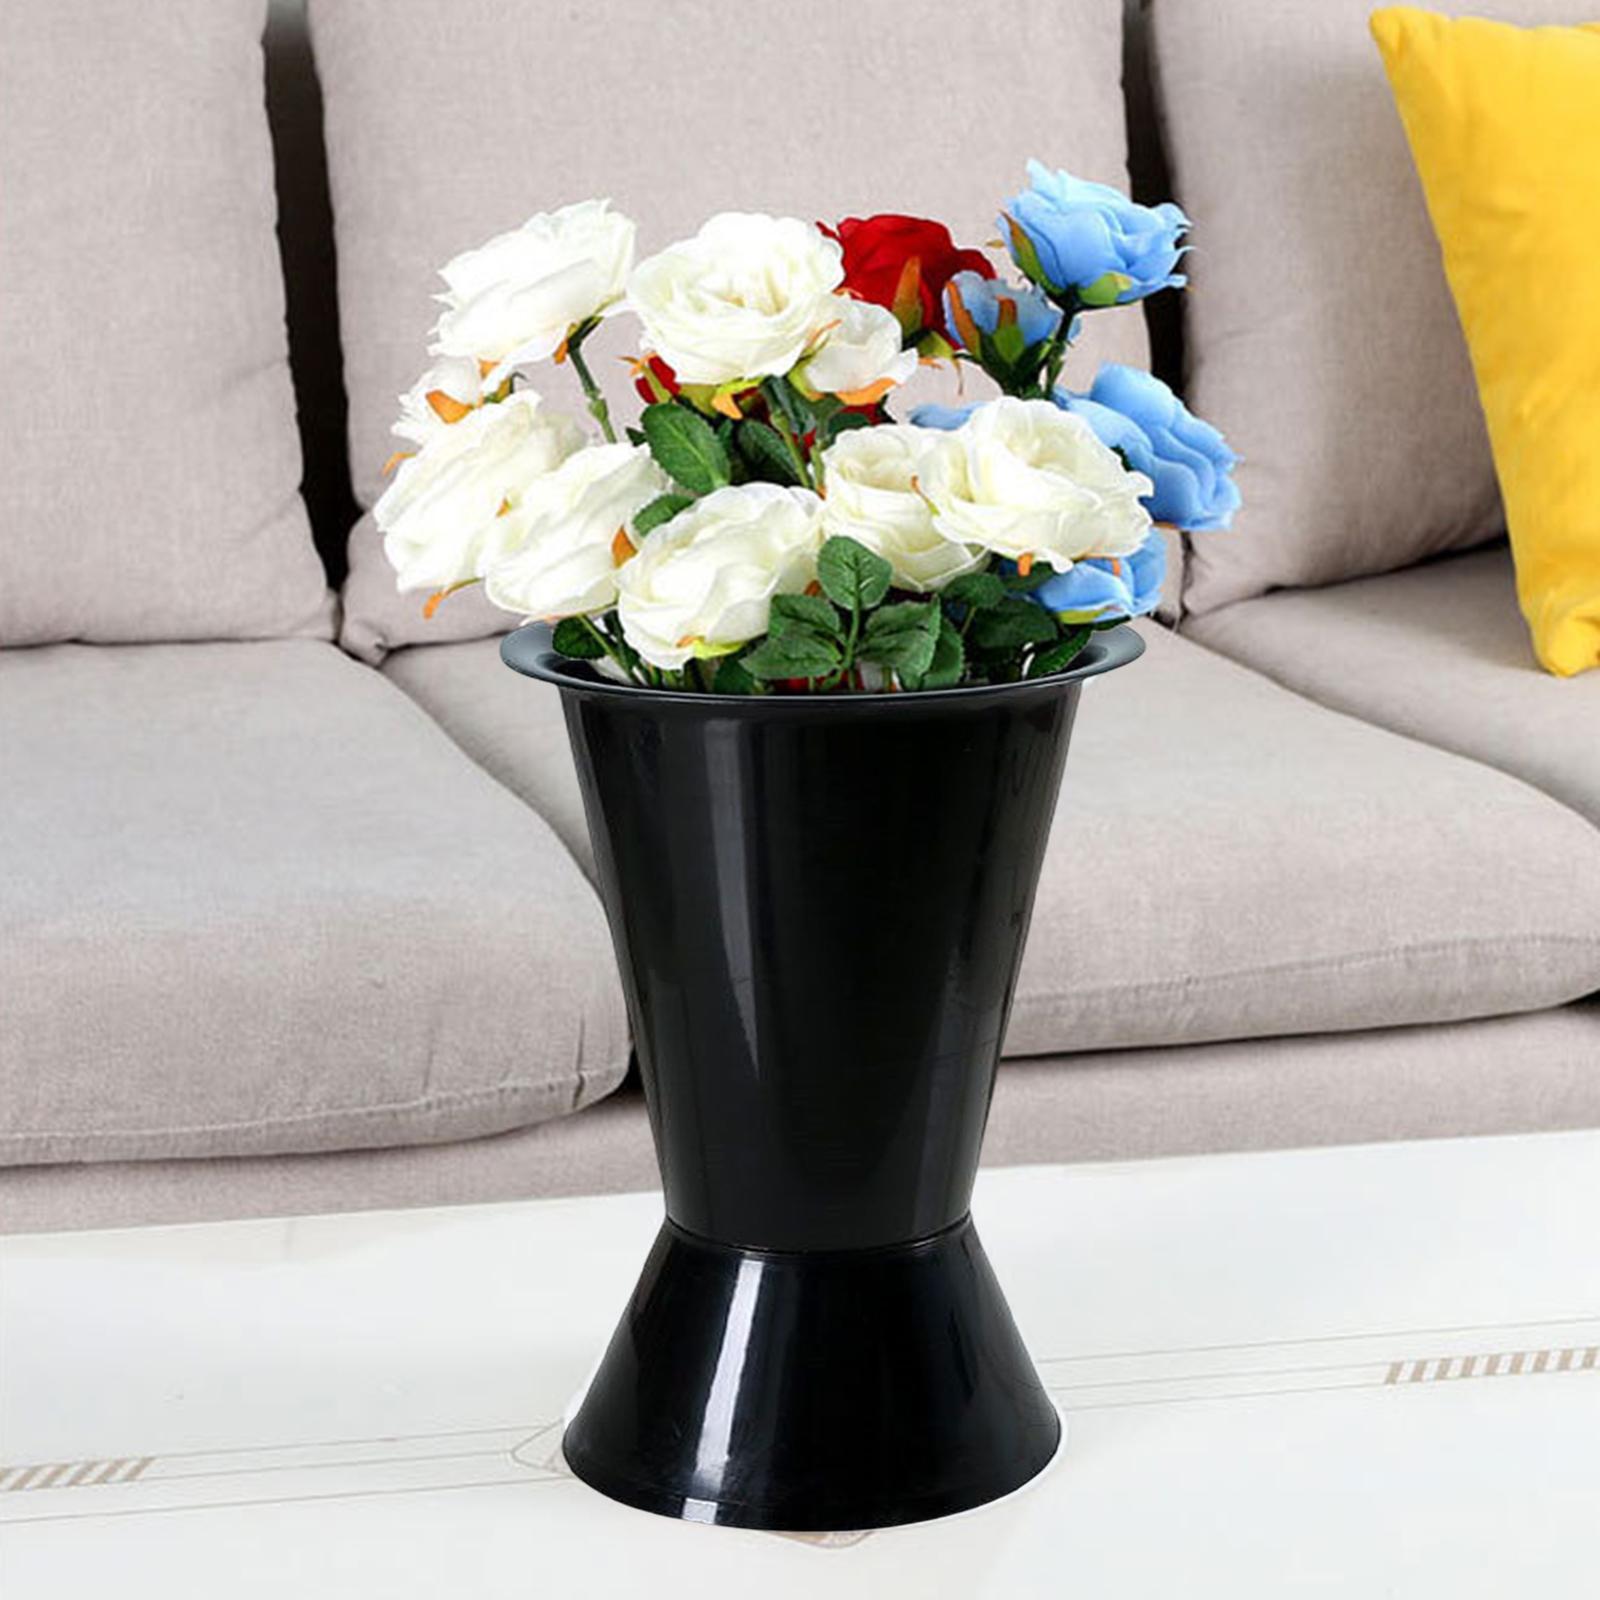 Flower Pot Aesthetic Bucket Decorative Jug Vase for Office Table Decorations